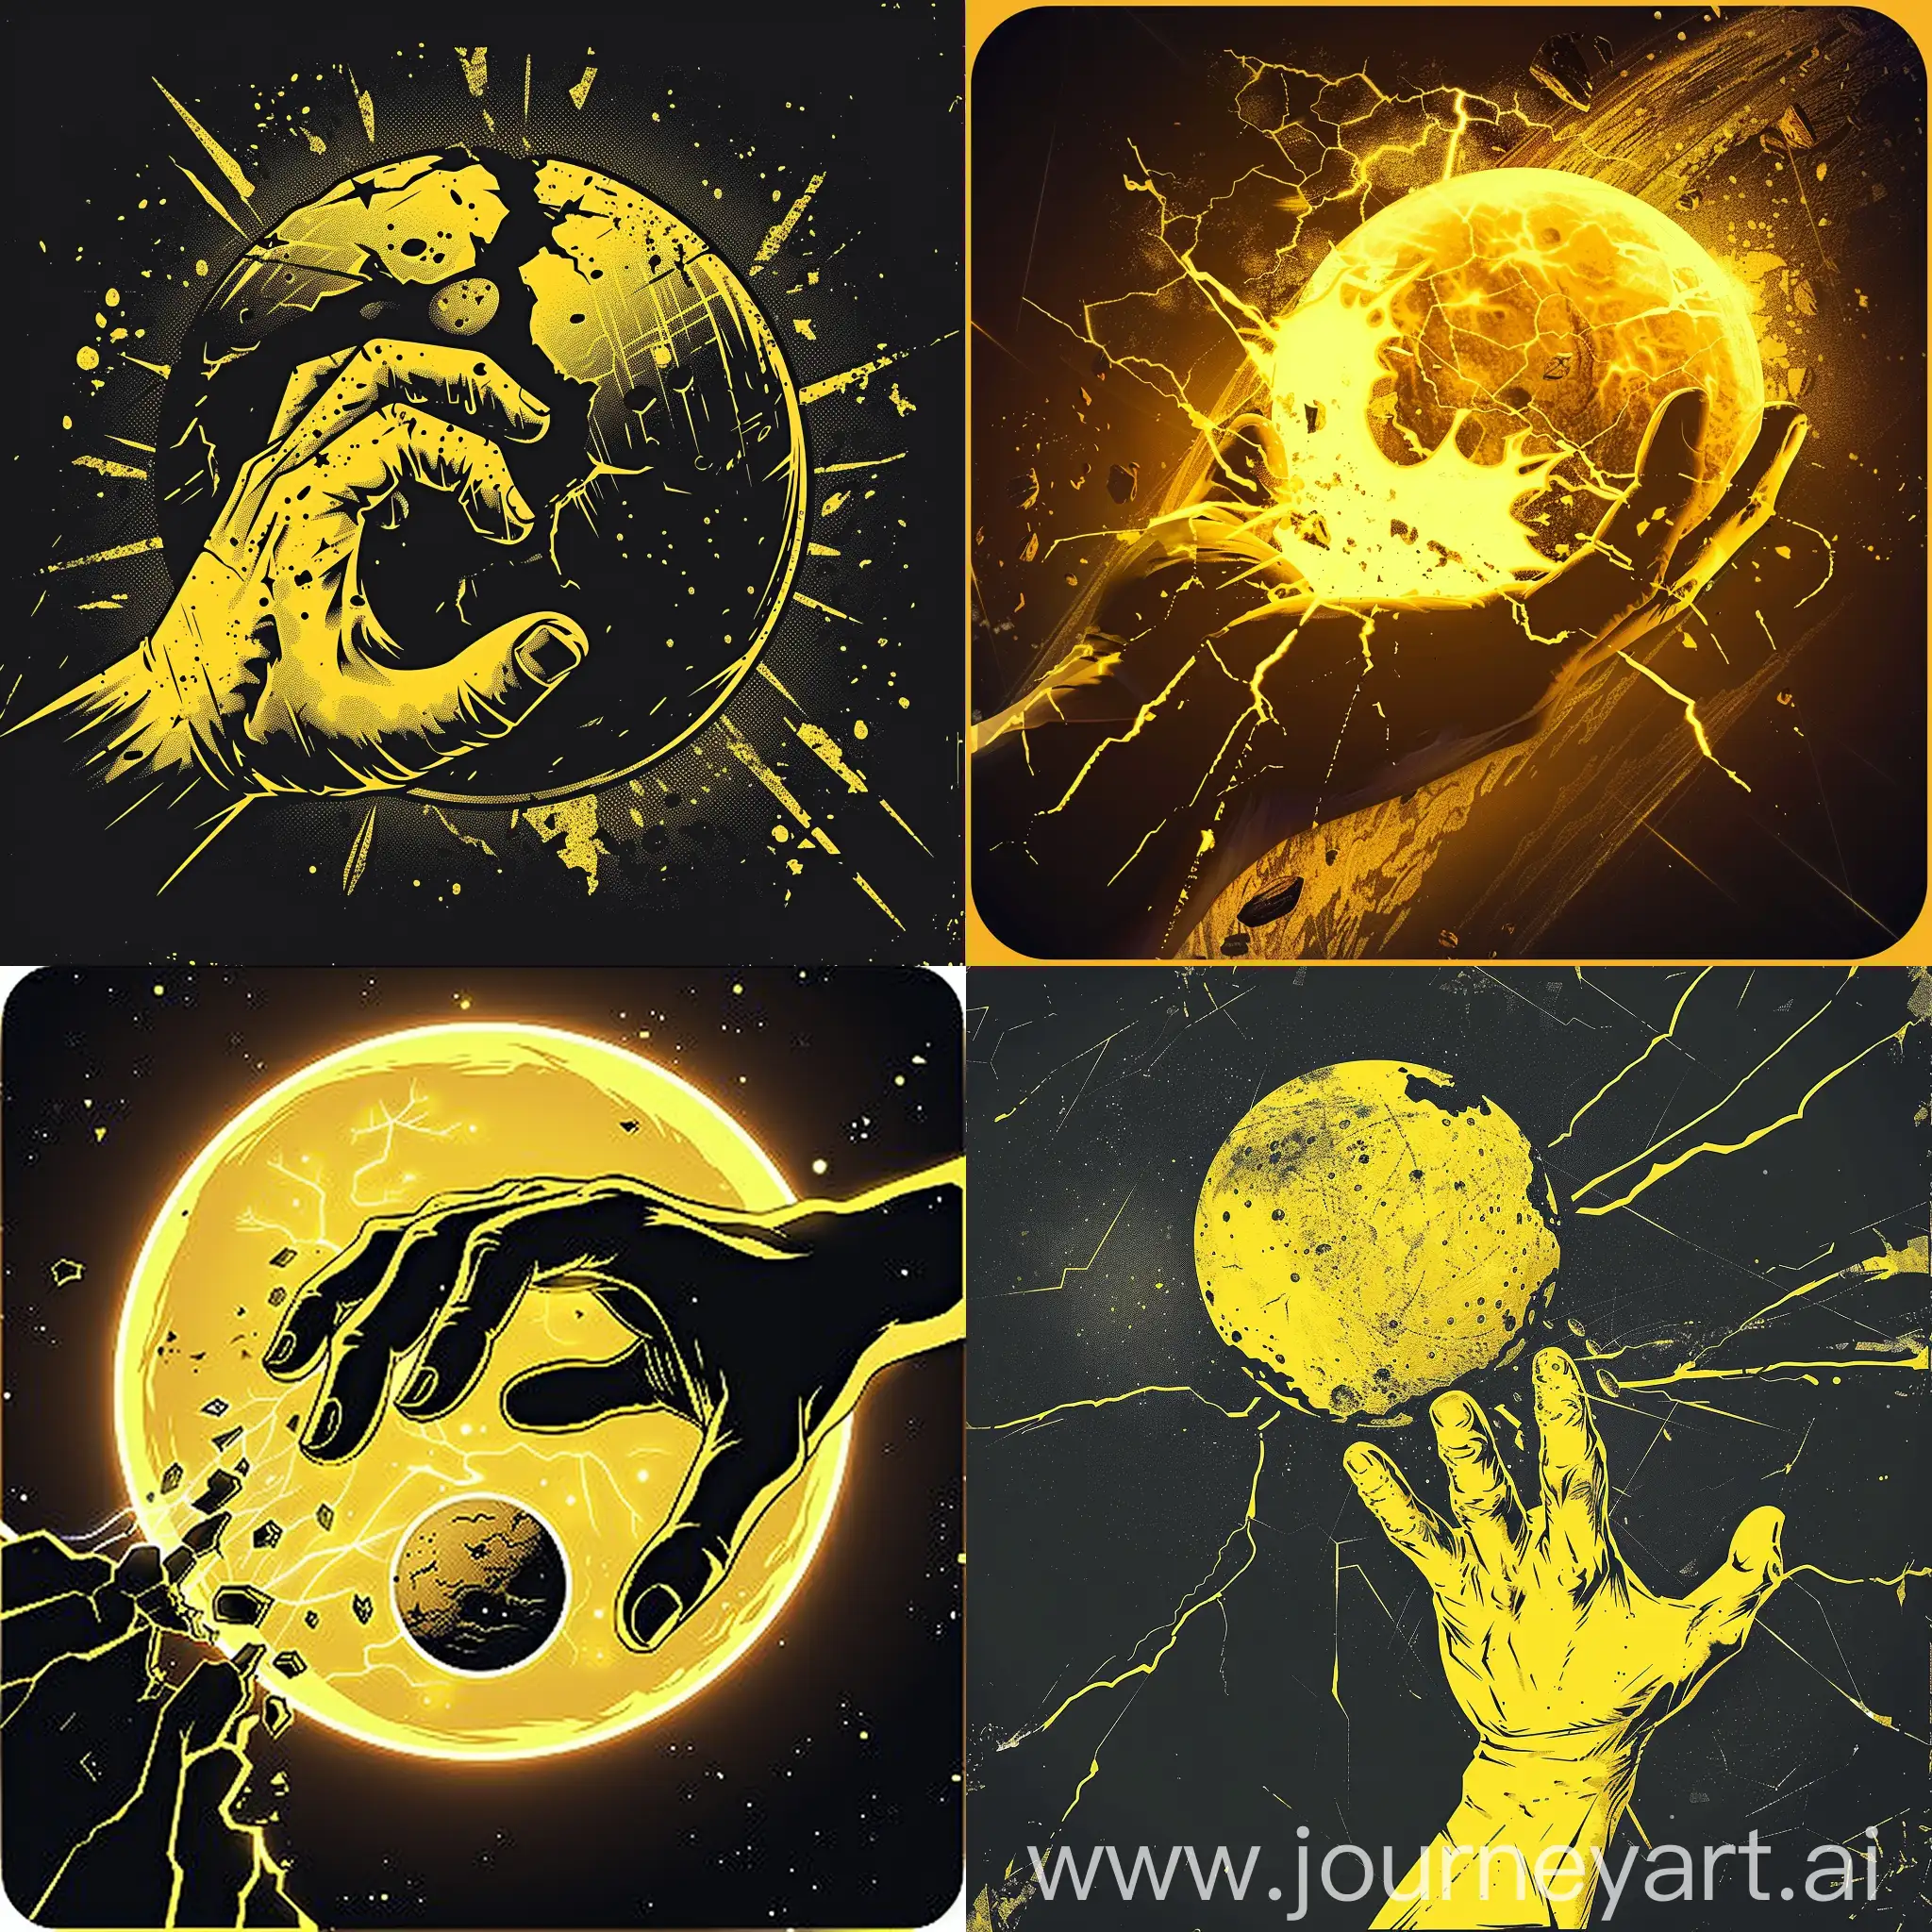 analog button of mobile moba game, there is a huge hand grabing a plannet, in style of yellow silhouette, the planet is cracking